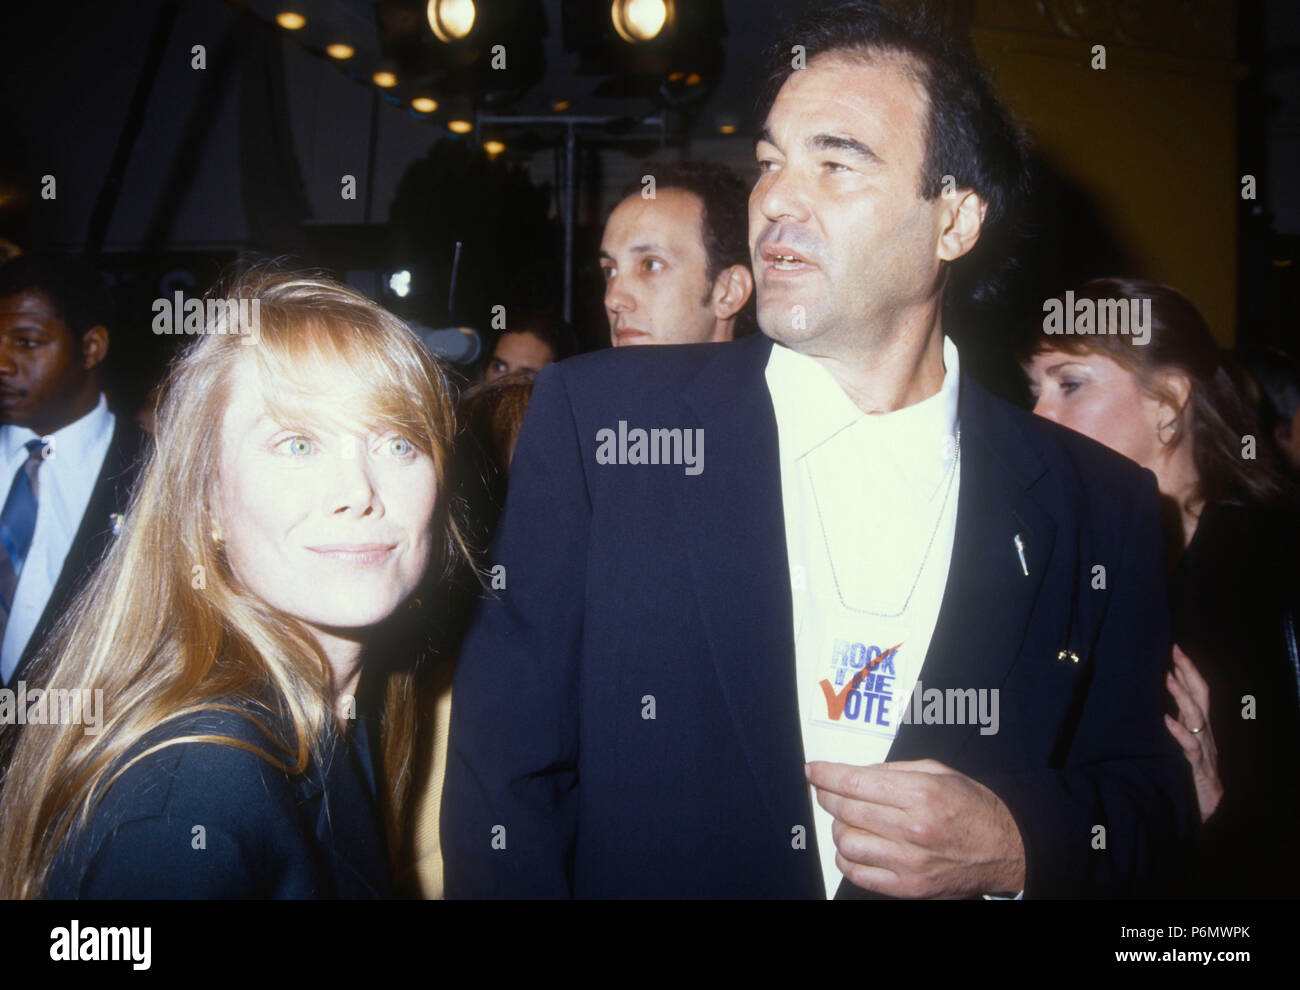 WESTWOOD, CA - DECEMBER 17: (L-R) Actress Sissy Spacek and director Oliver Stone attend the 'JFK' Westwood Premiere on December 17, 1991 at Mann Village Theatre in Westwood, California. Photo by Barry King/Alamy Stock Photo Stock Photo